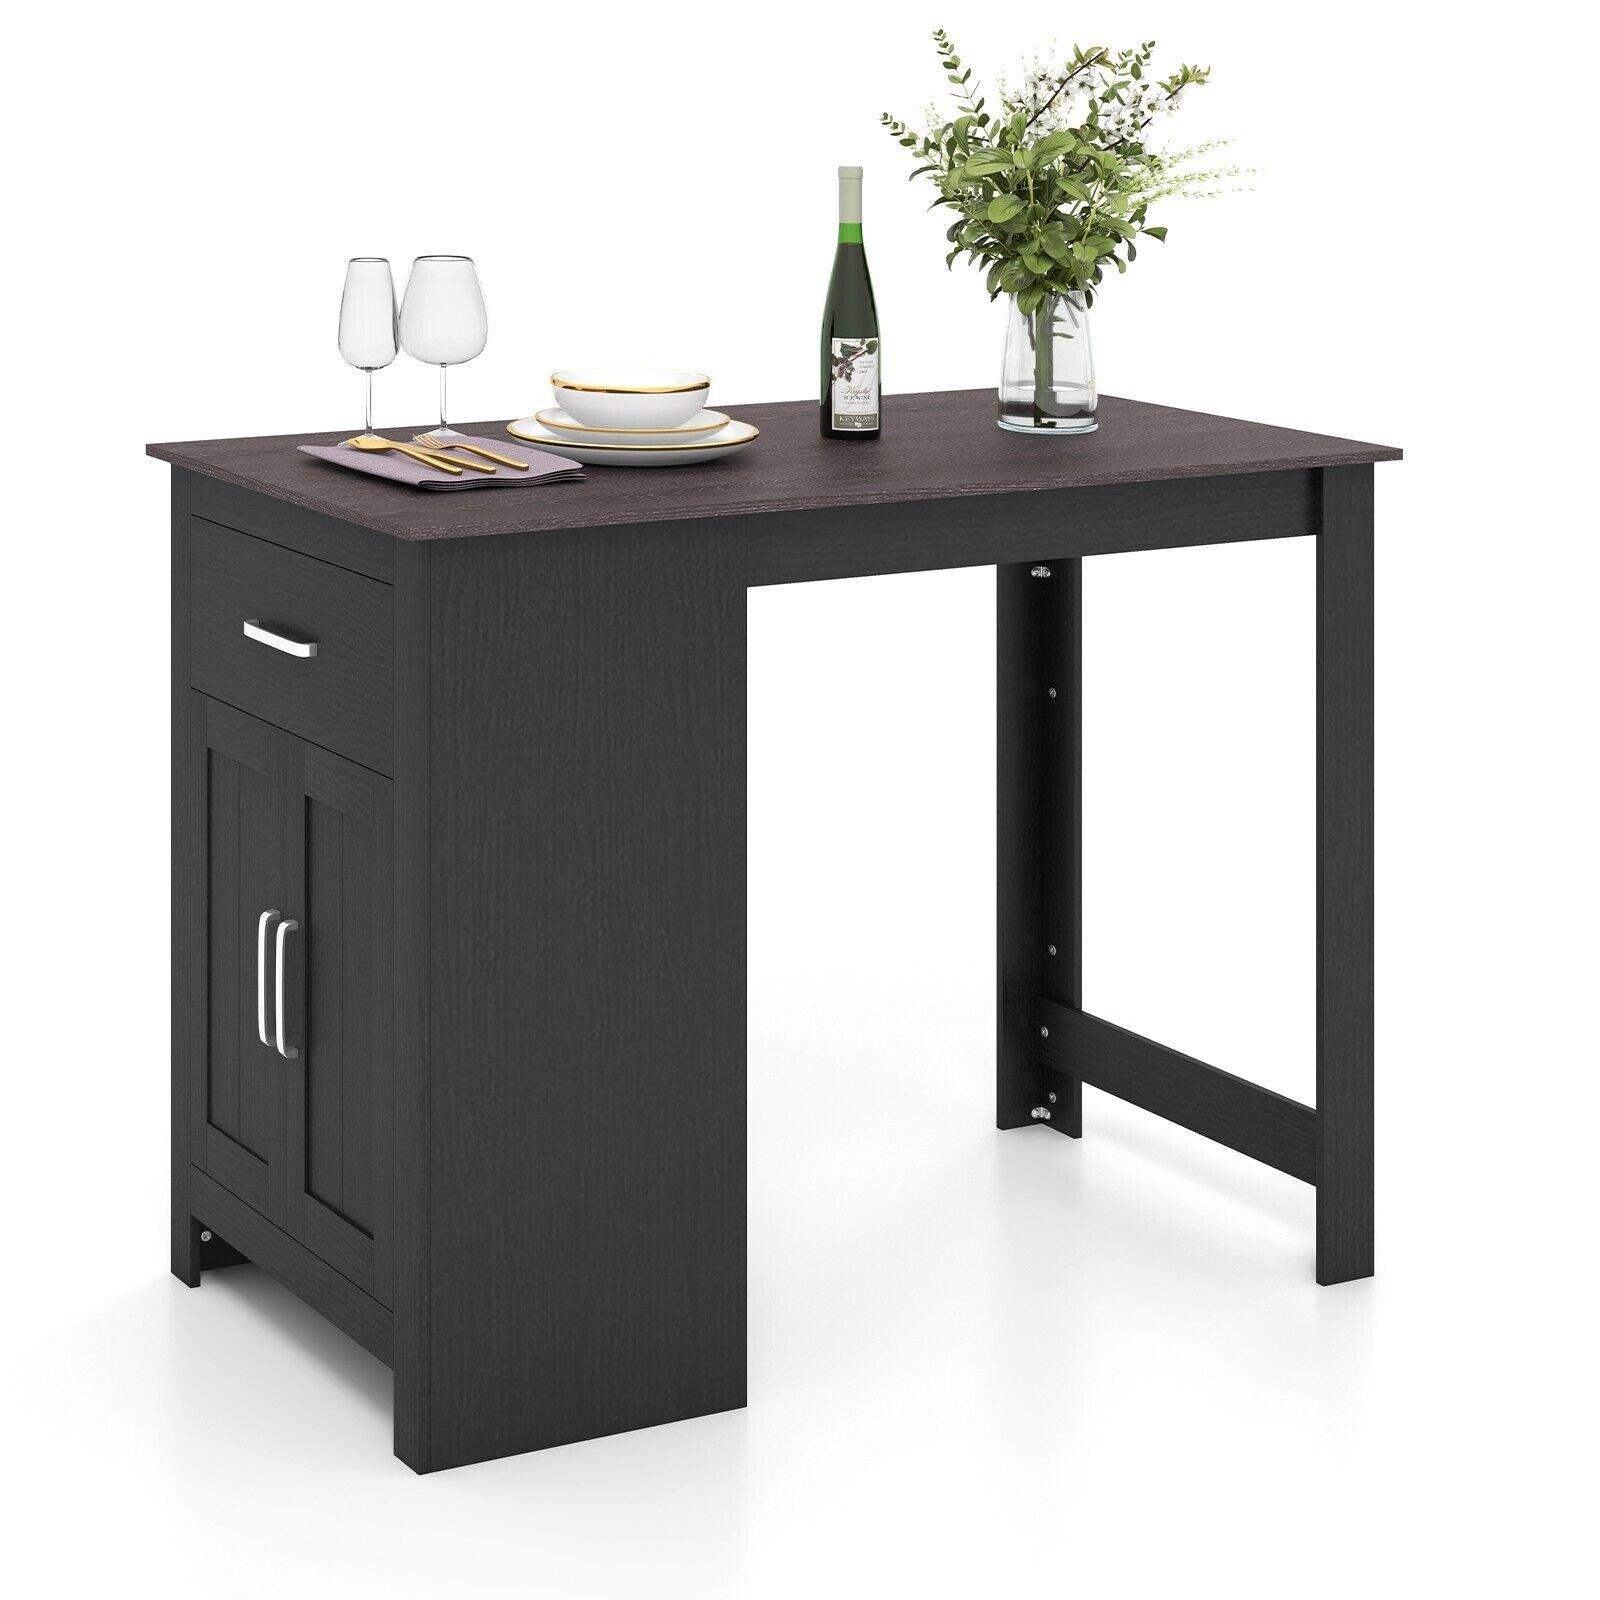 Counter Height Table with Storage Rectangular Pub Table